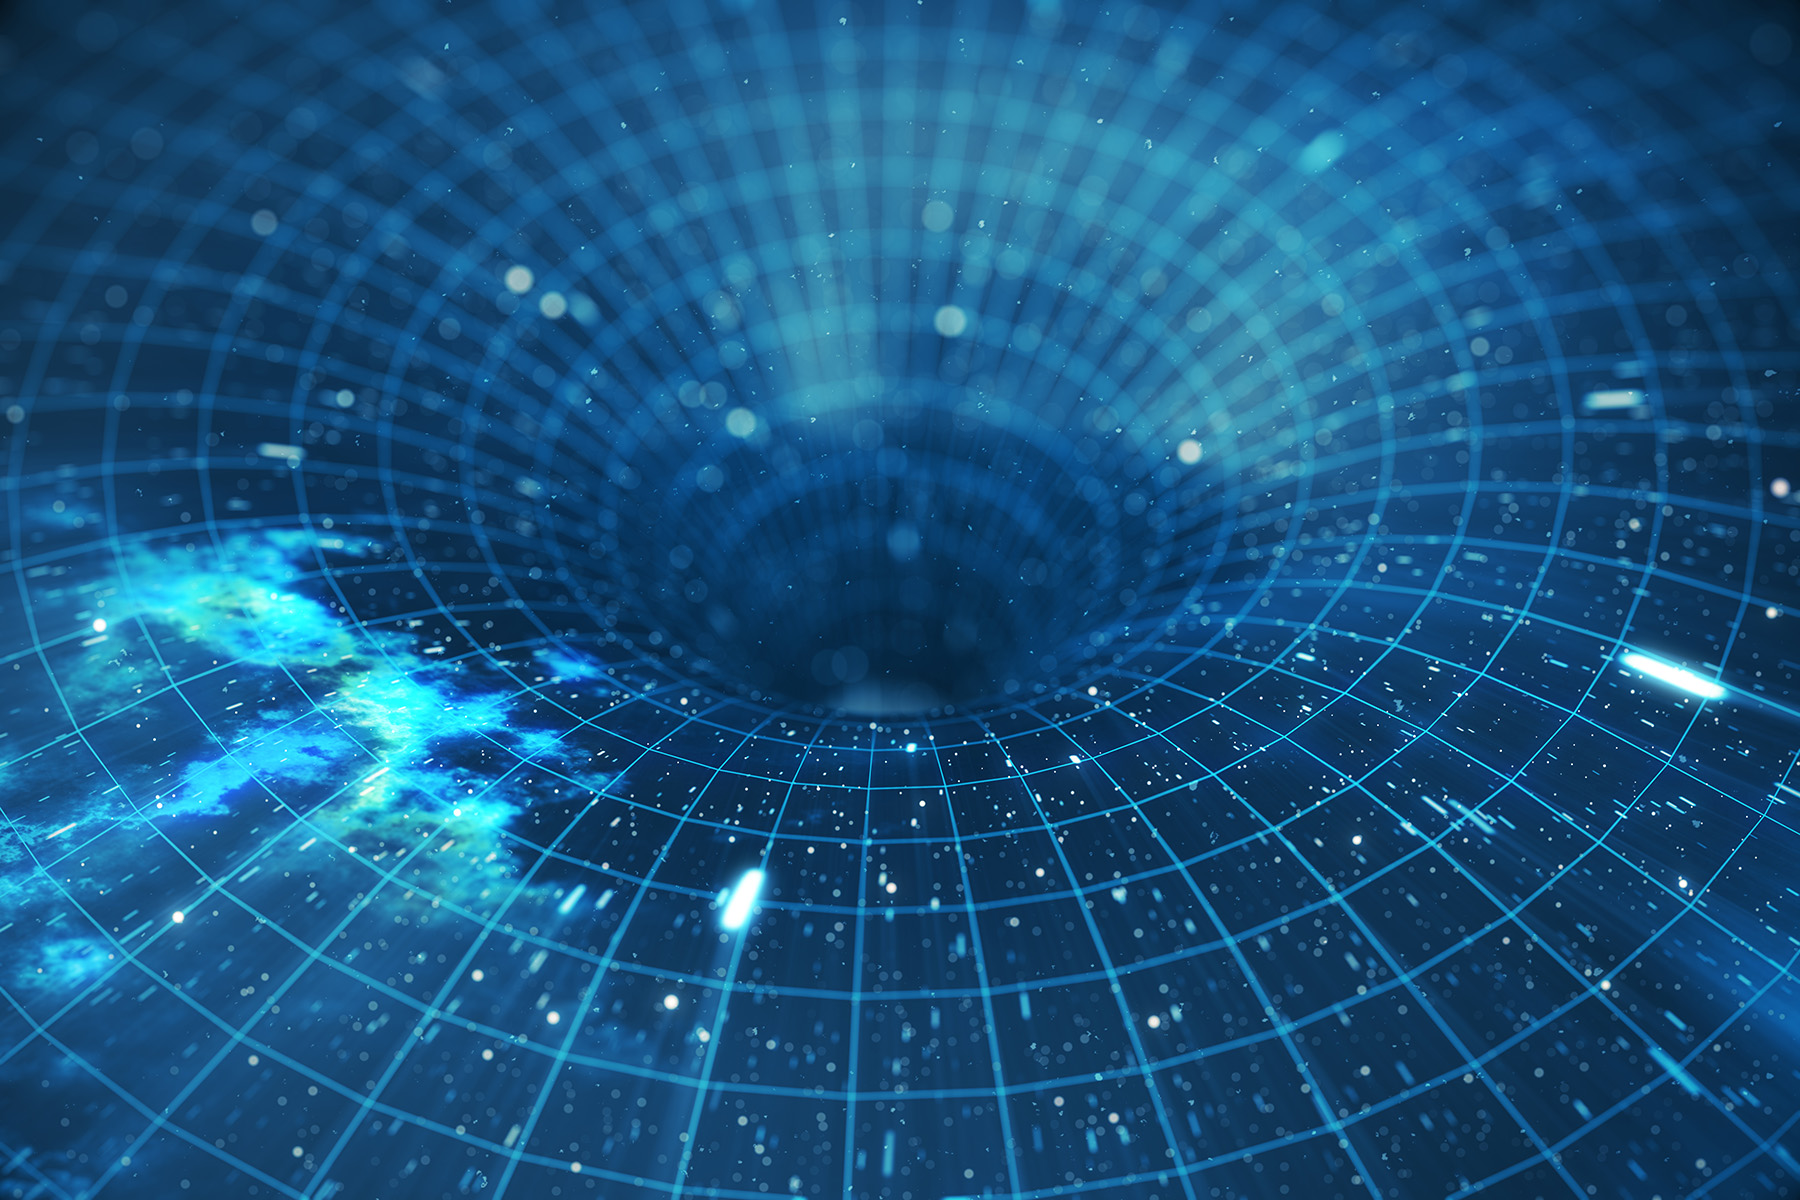 A digital representation of a gravity well in space, meant to convey the idea of quantum gravity.